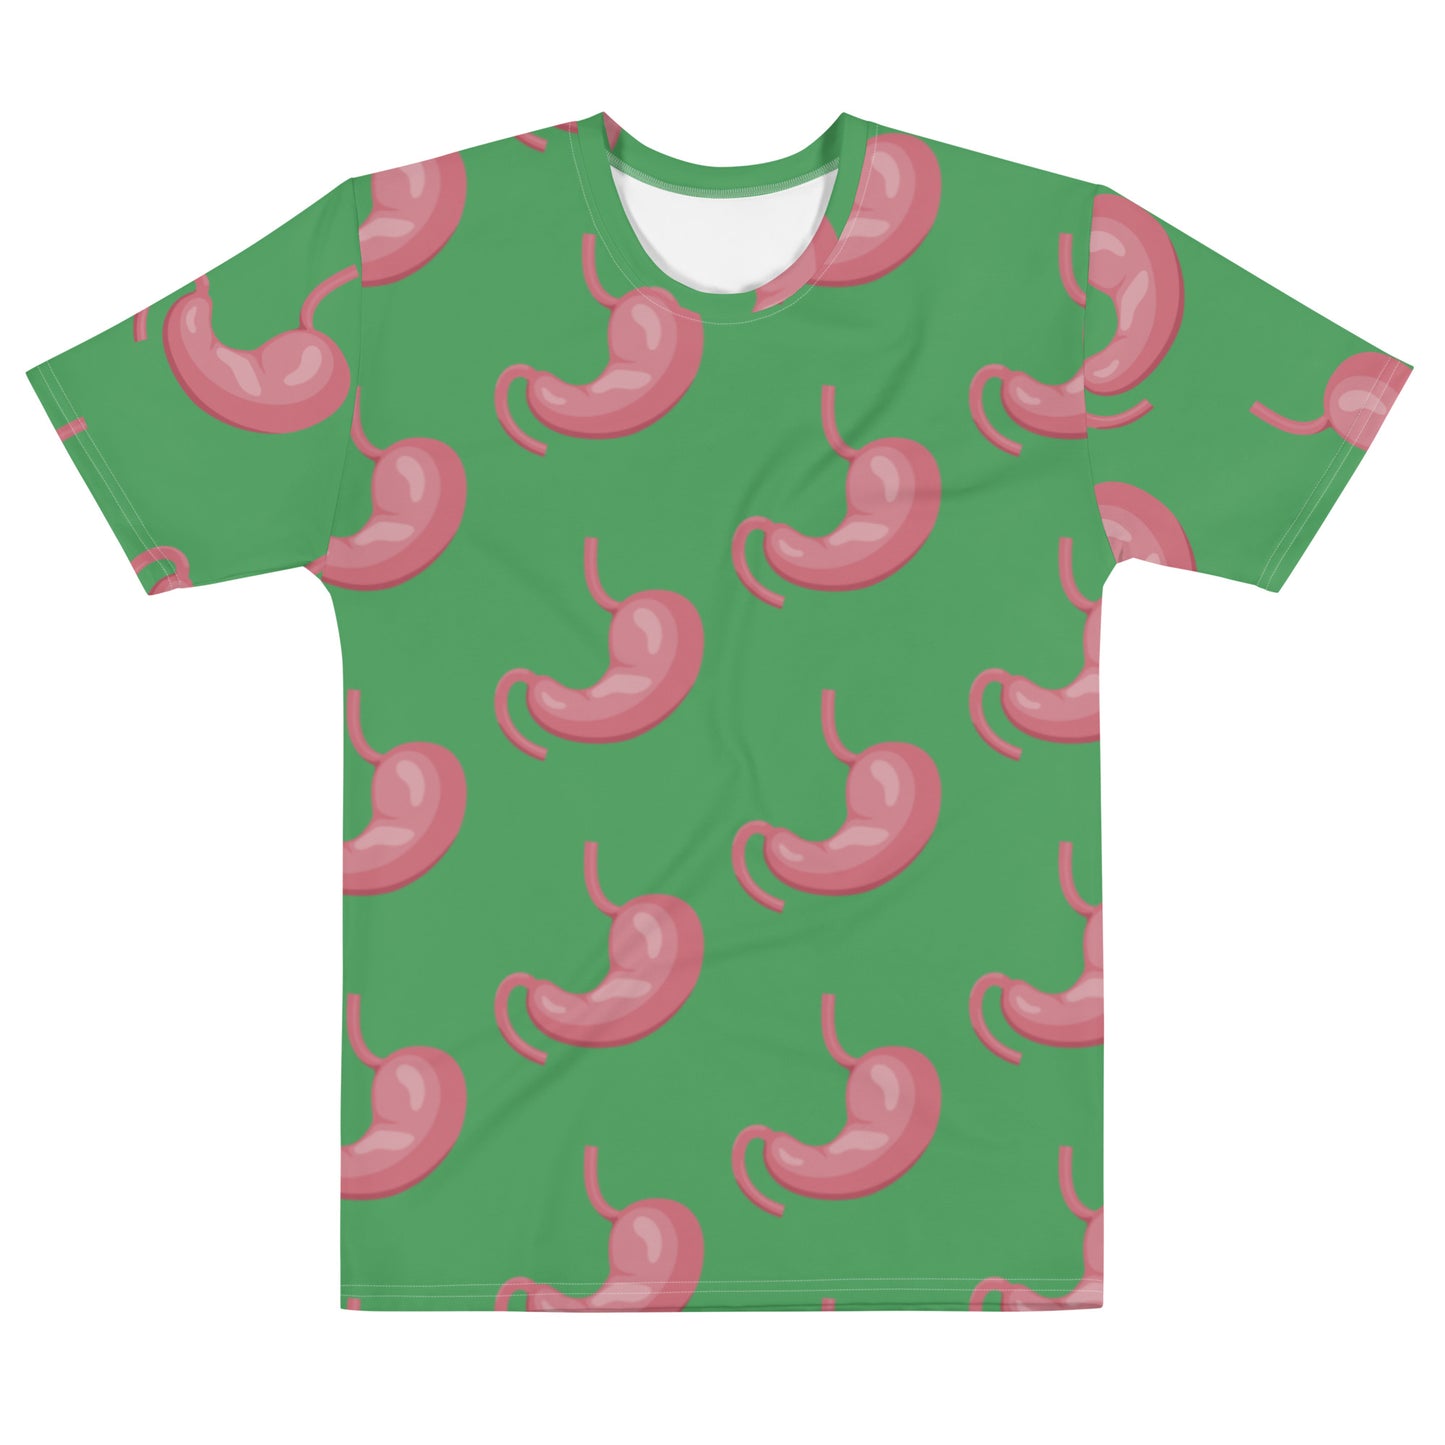 Men's All-Over Print Tee: Stomach